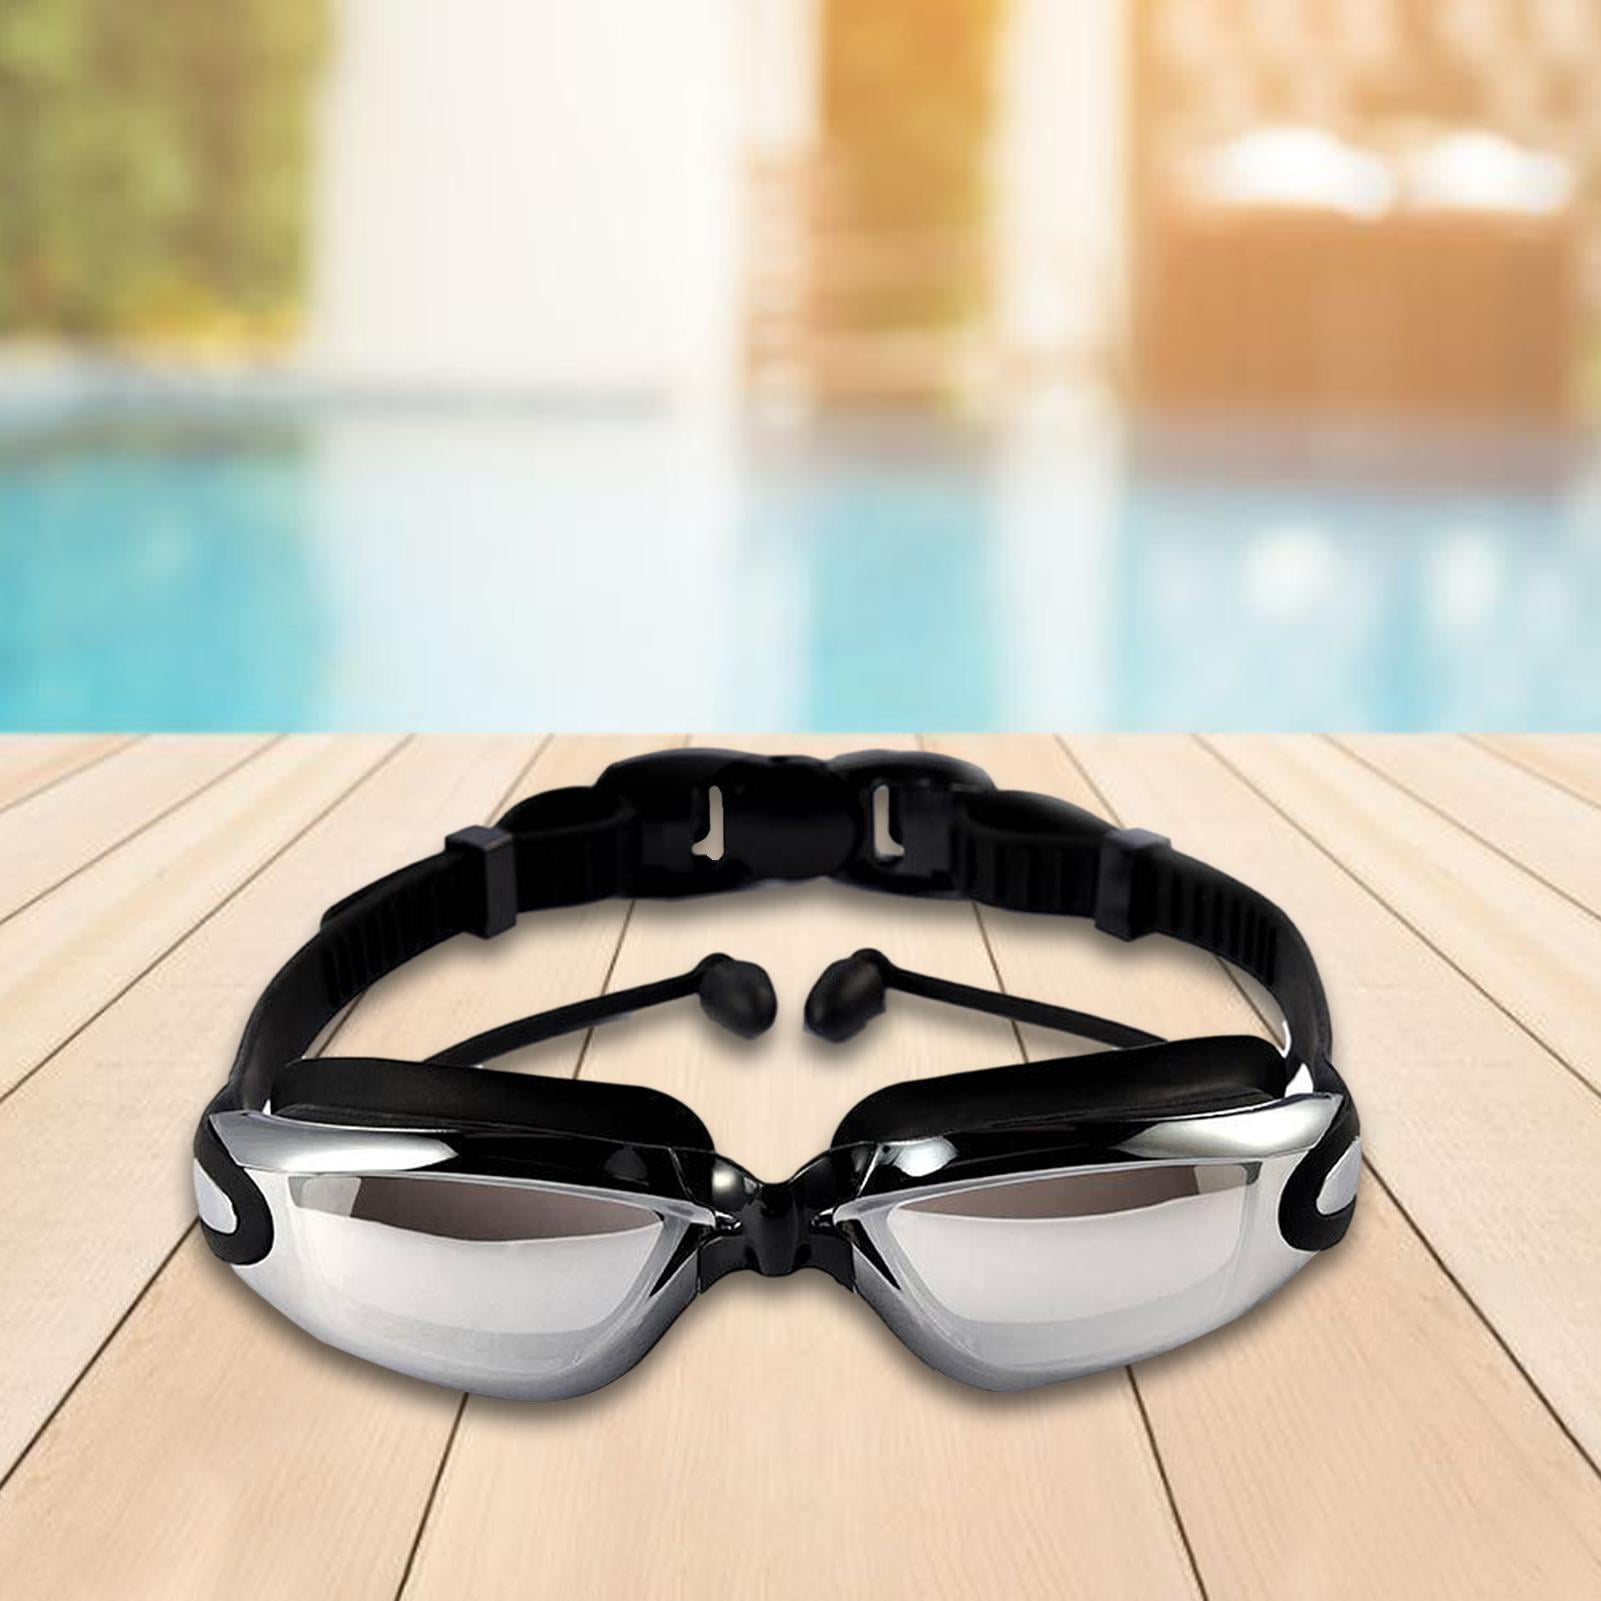 Details about   Swim Goggles for Men Women Youth Adult Comfortable Anti-Fog Leak Proof H-4 